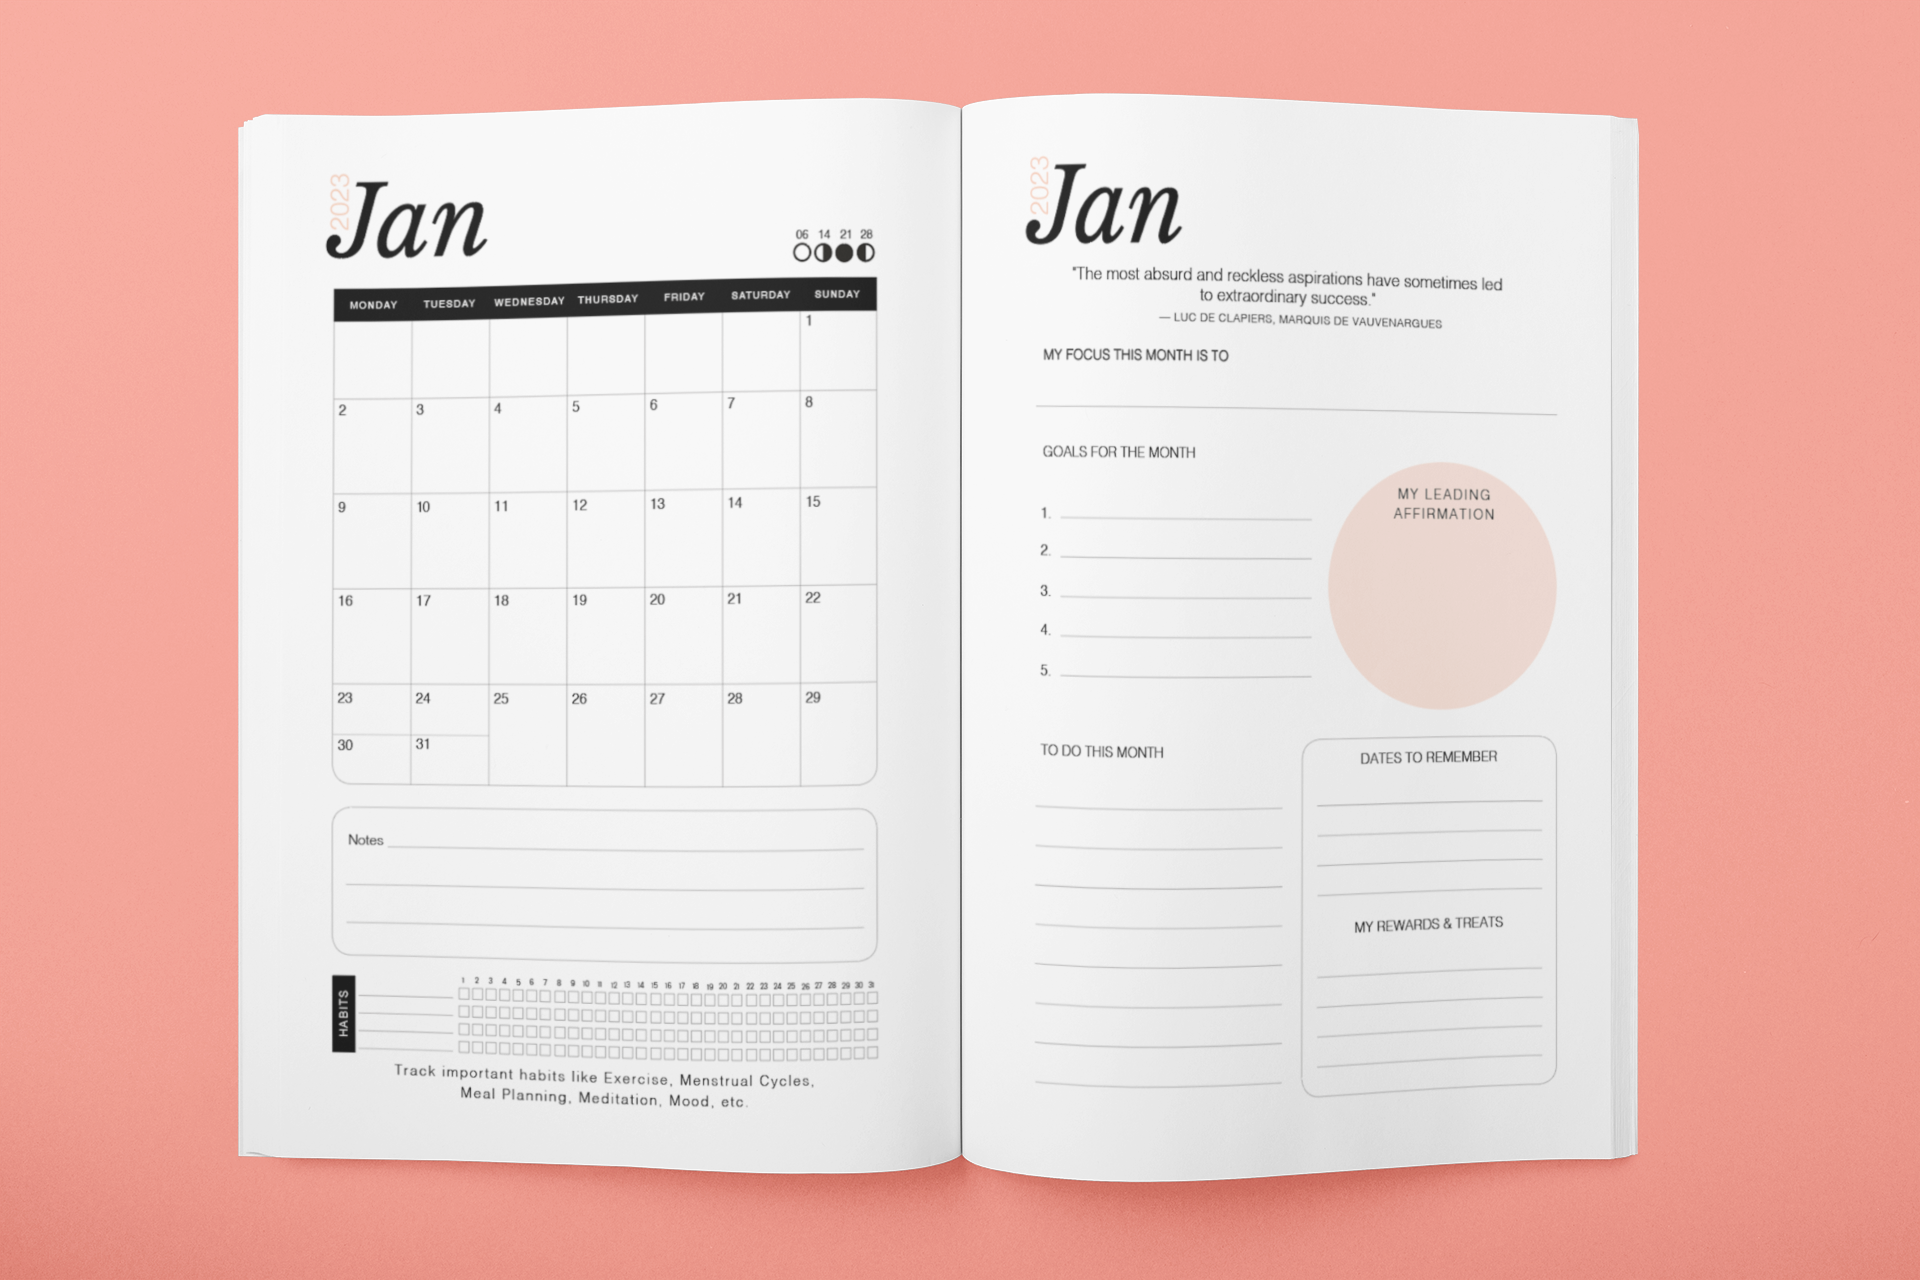 90-Day Planner and Mini Journal to help you get organized, focused and reach your goals. Contains monthly calendar view in 90 day increments, weekly pages, review pages, accomplishments and insights page. MindMap, wellness wheel and moon cycles. 